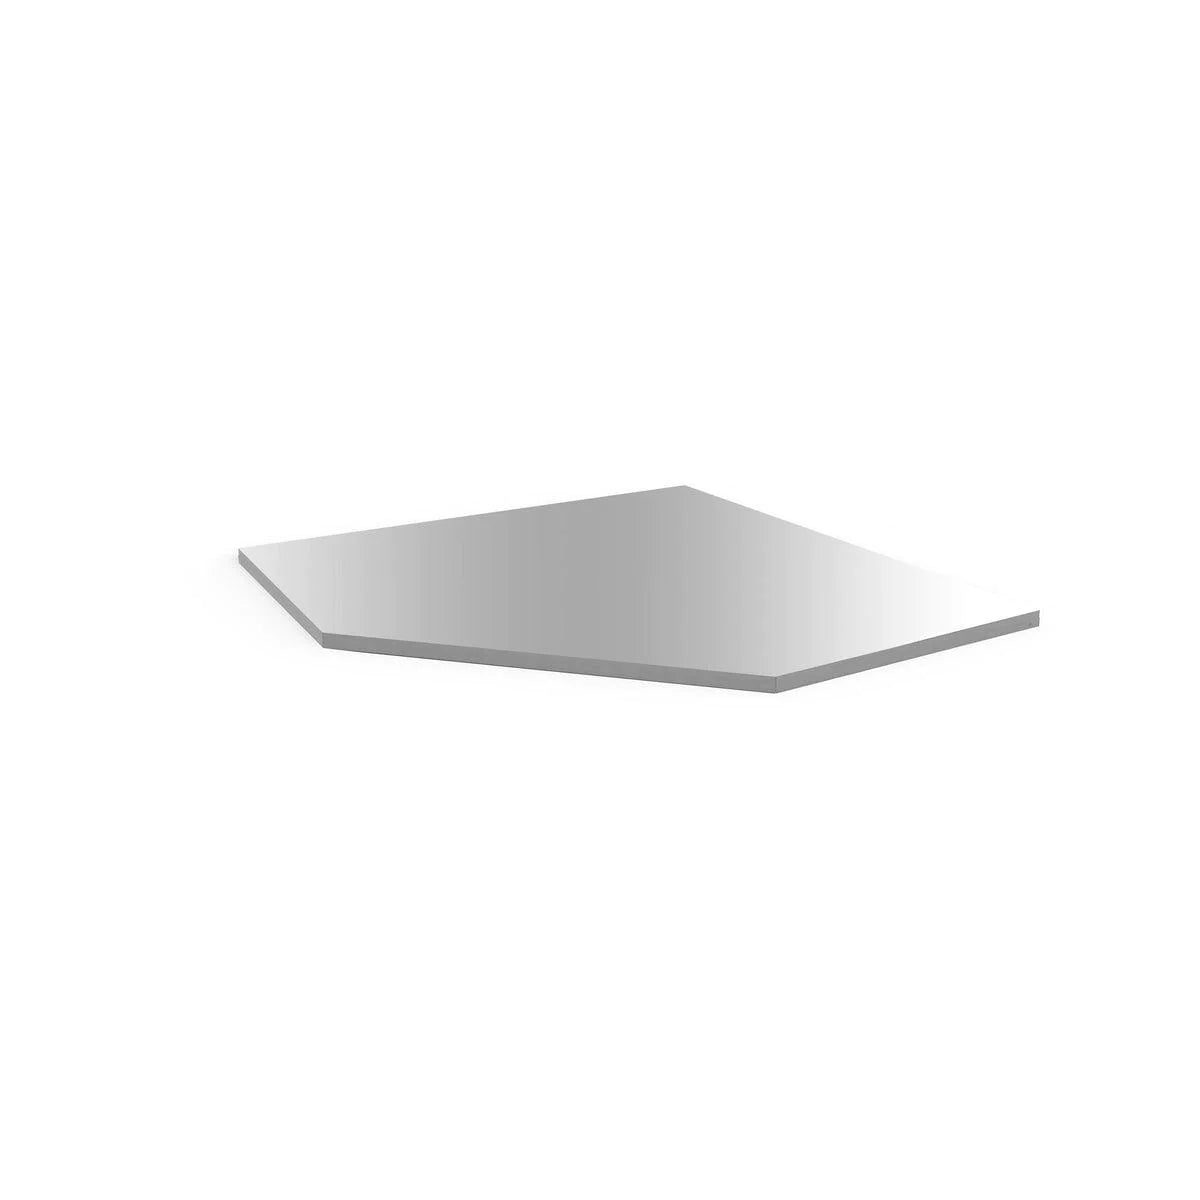 Dimple Stainless Worktop, Corner Cabinet 41.85" W x 19.68" D x 1.5" H